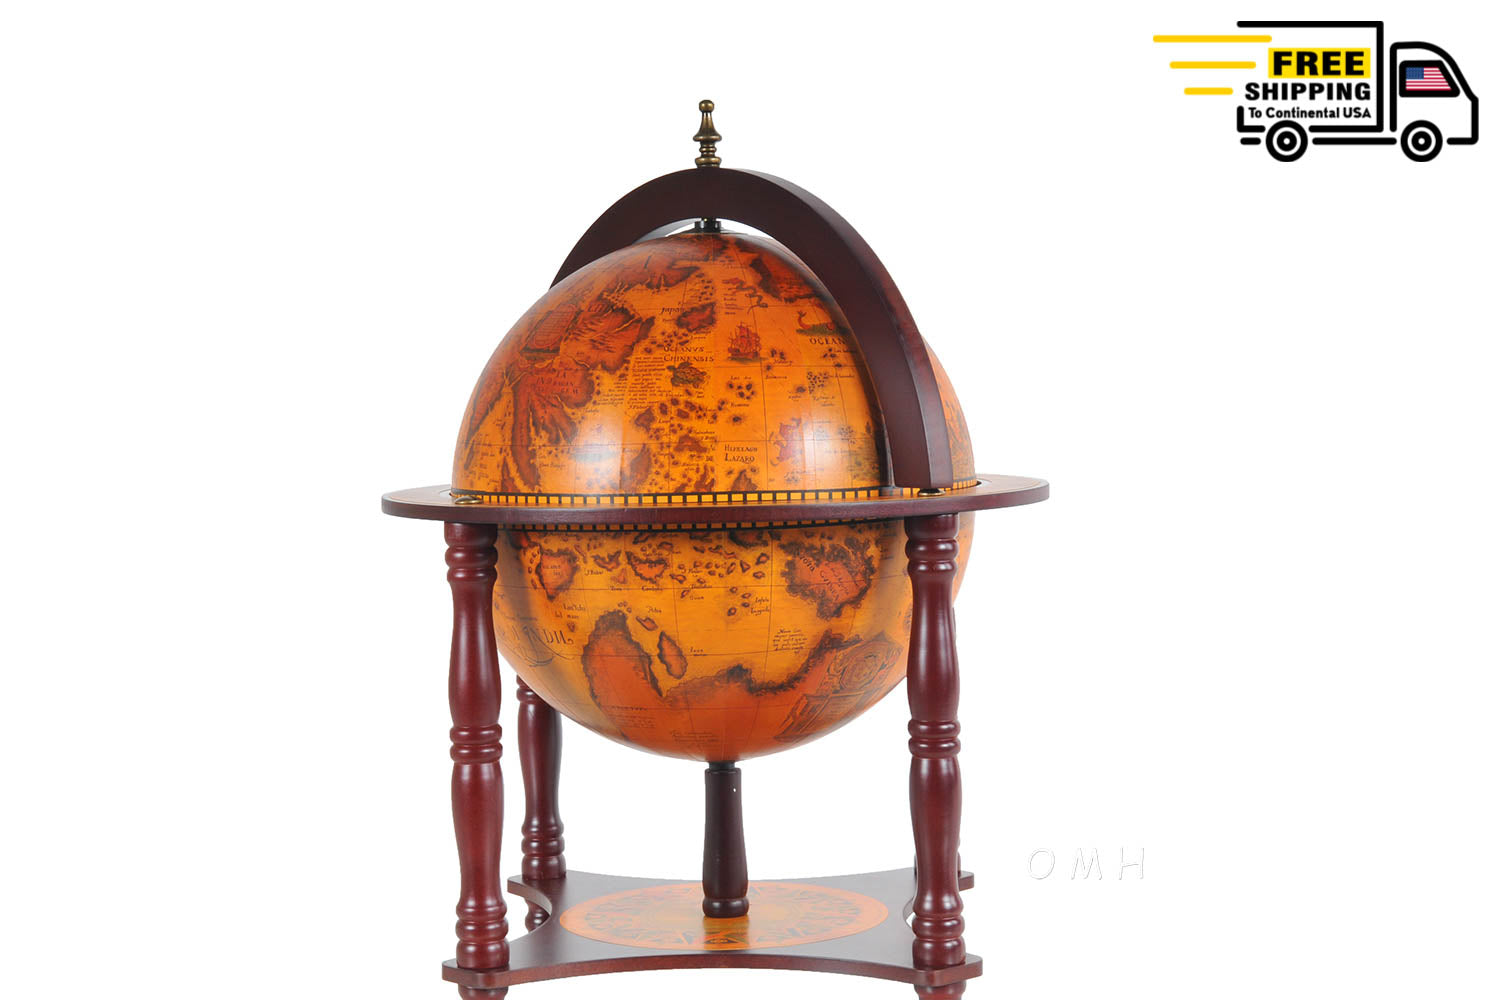 Red Globe 13 inches with chess holder with 4 legs stand | Handcrafted Antique finish | Vintage arts and crafts